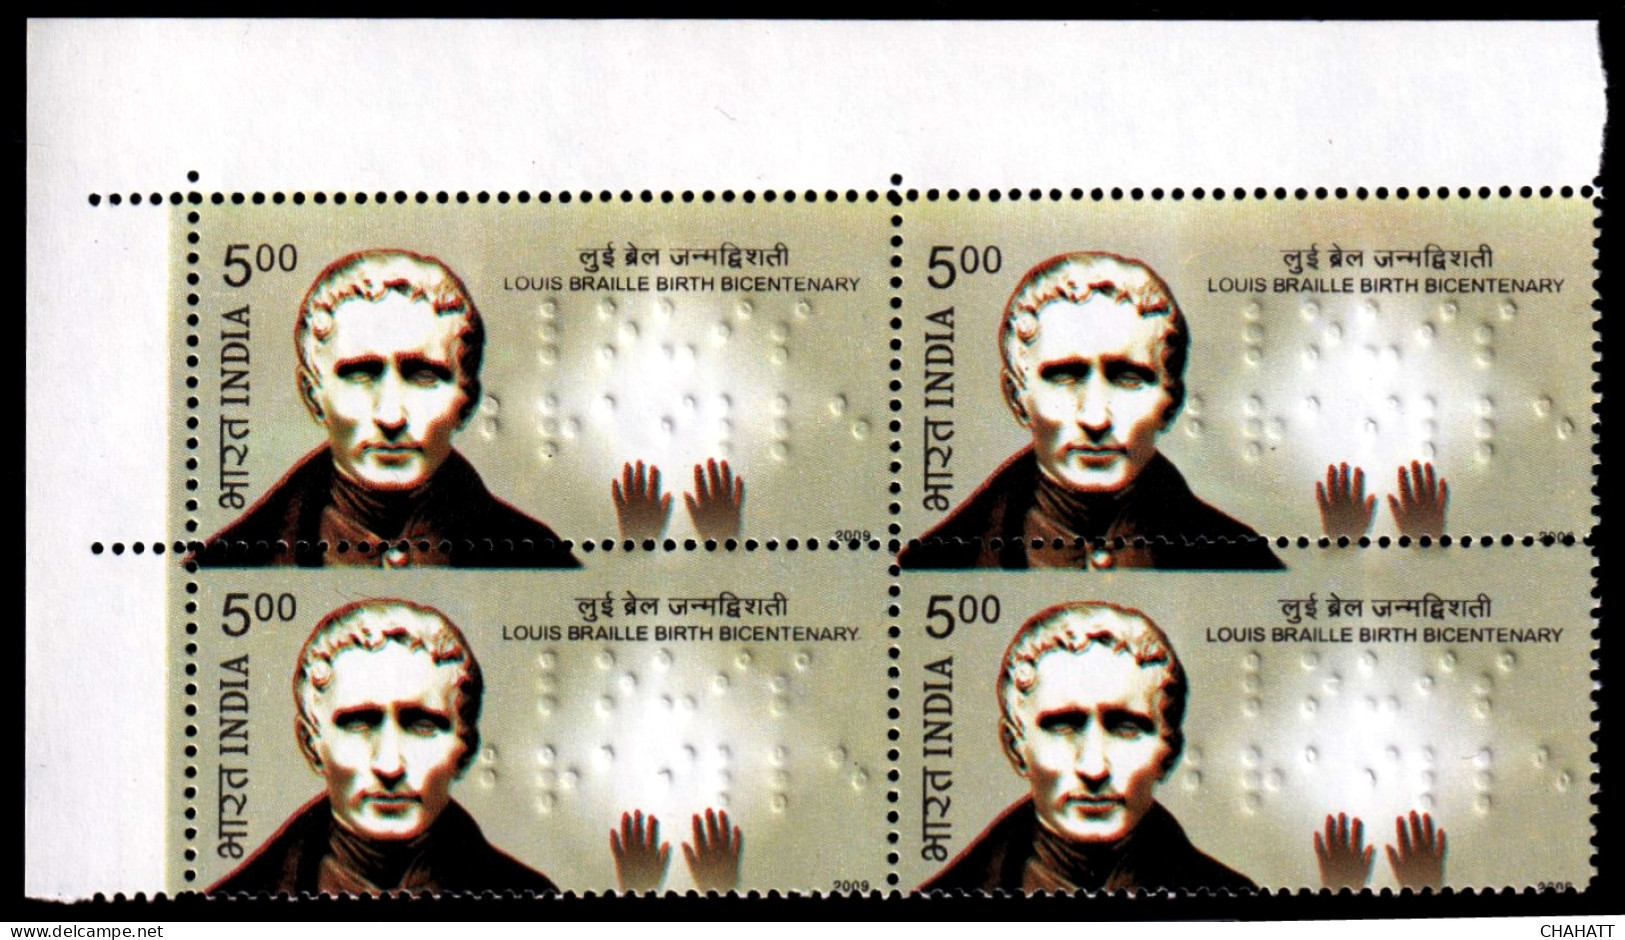 HEALTH- LOUIS BRAILE CENTENARY-- ERROR-DRAMATIC PERFORATION SHIFT-2X BLKS OF 4- INDIA-2009- MNH-IE-92 - Errors, Freaks & Oddities (EFO)